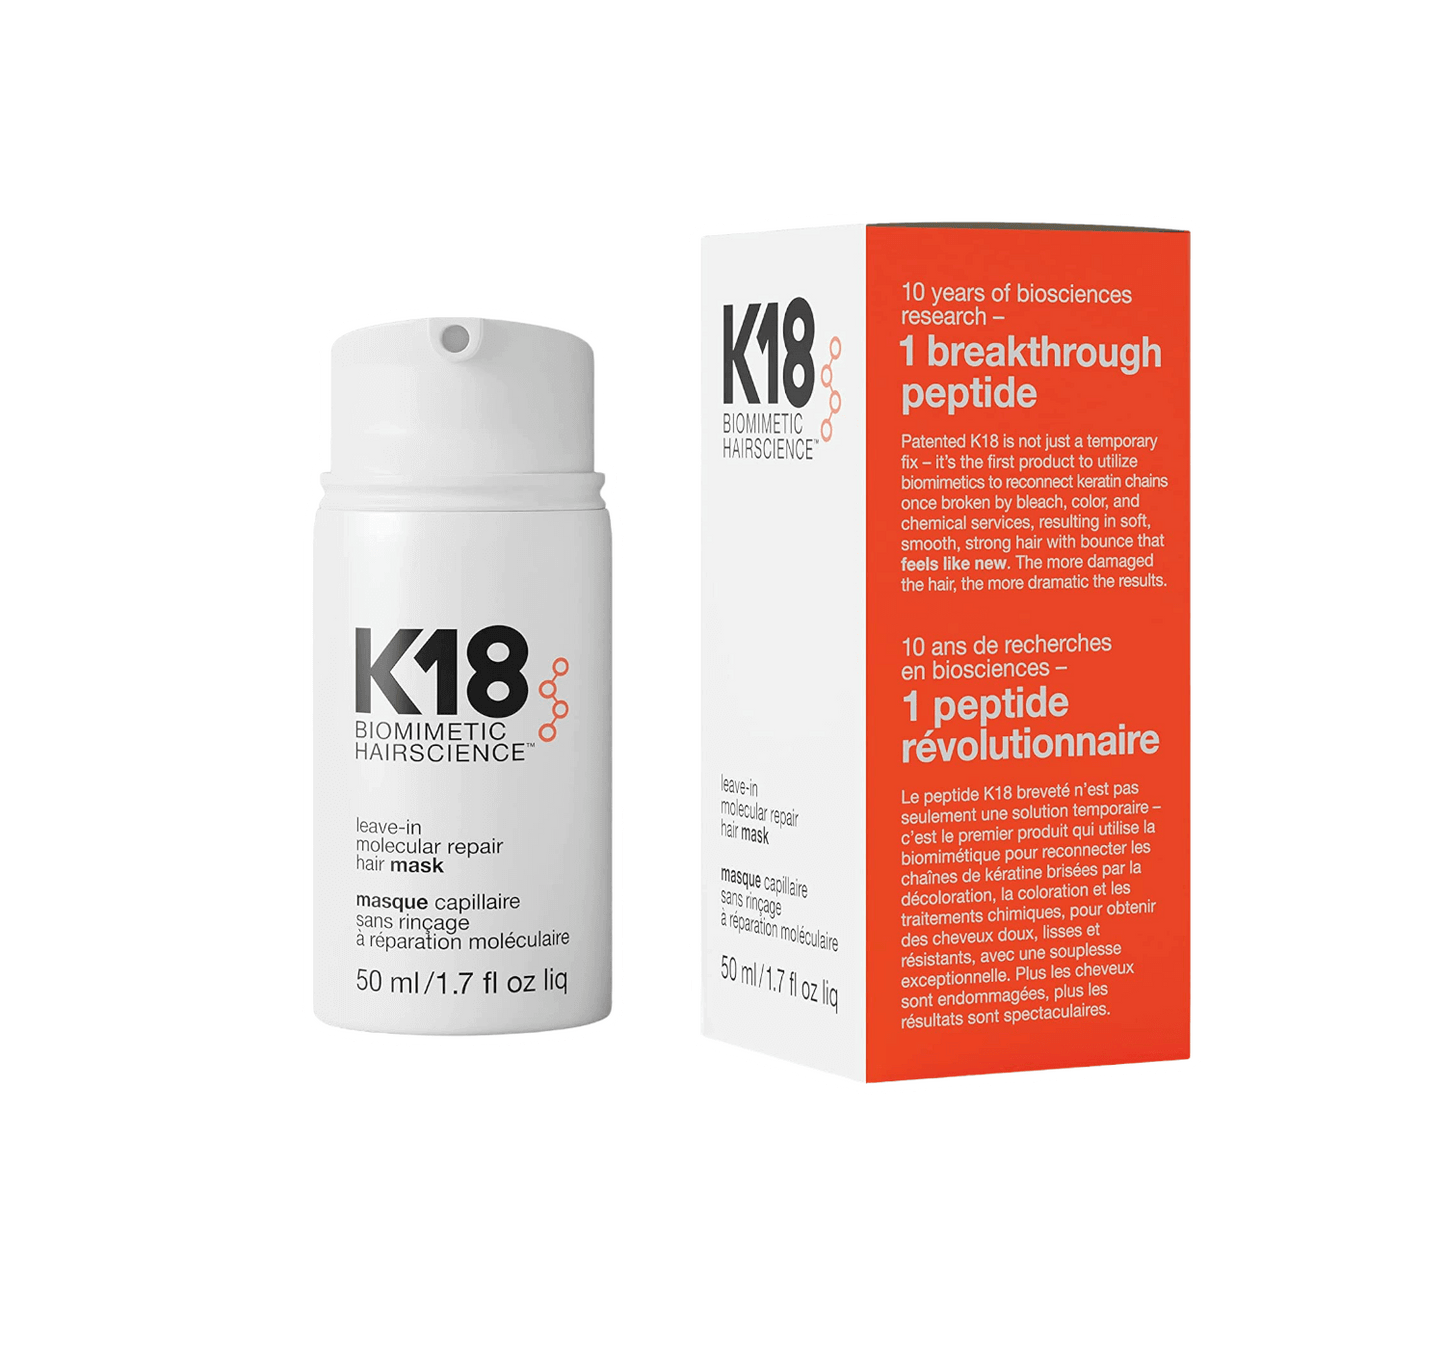 K18 Biotech oil that instantly repairs keratin chains in 4 minutes